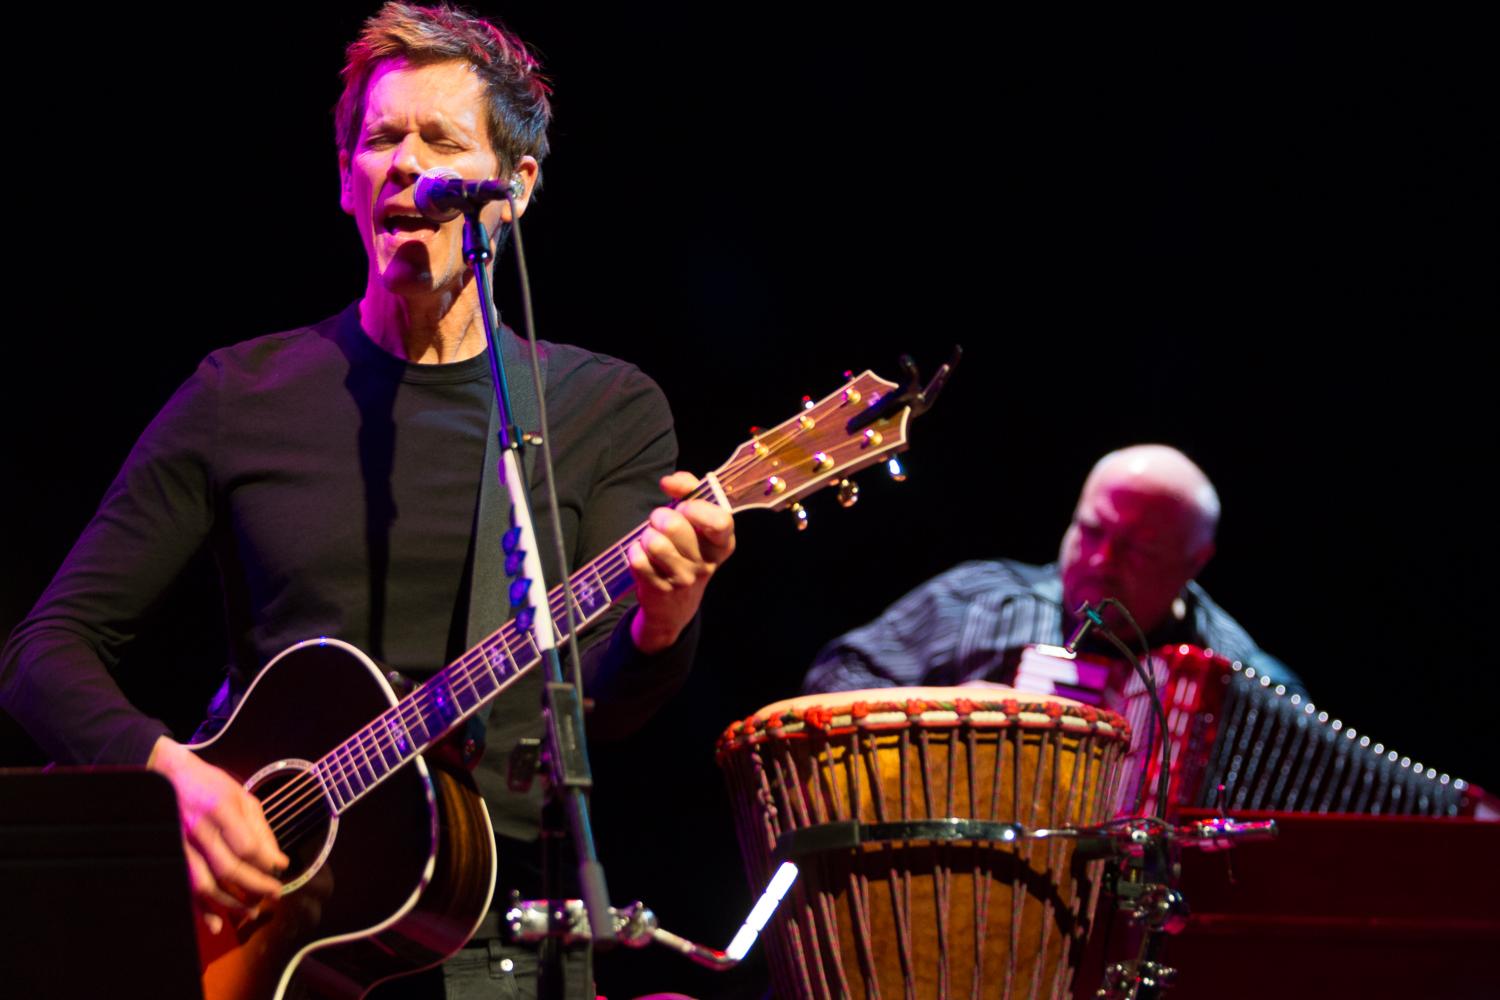 Kevin Bacon performs at Lisner Auditorium with the Bacon Brothers.